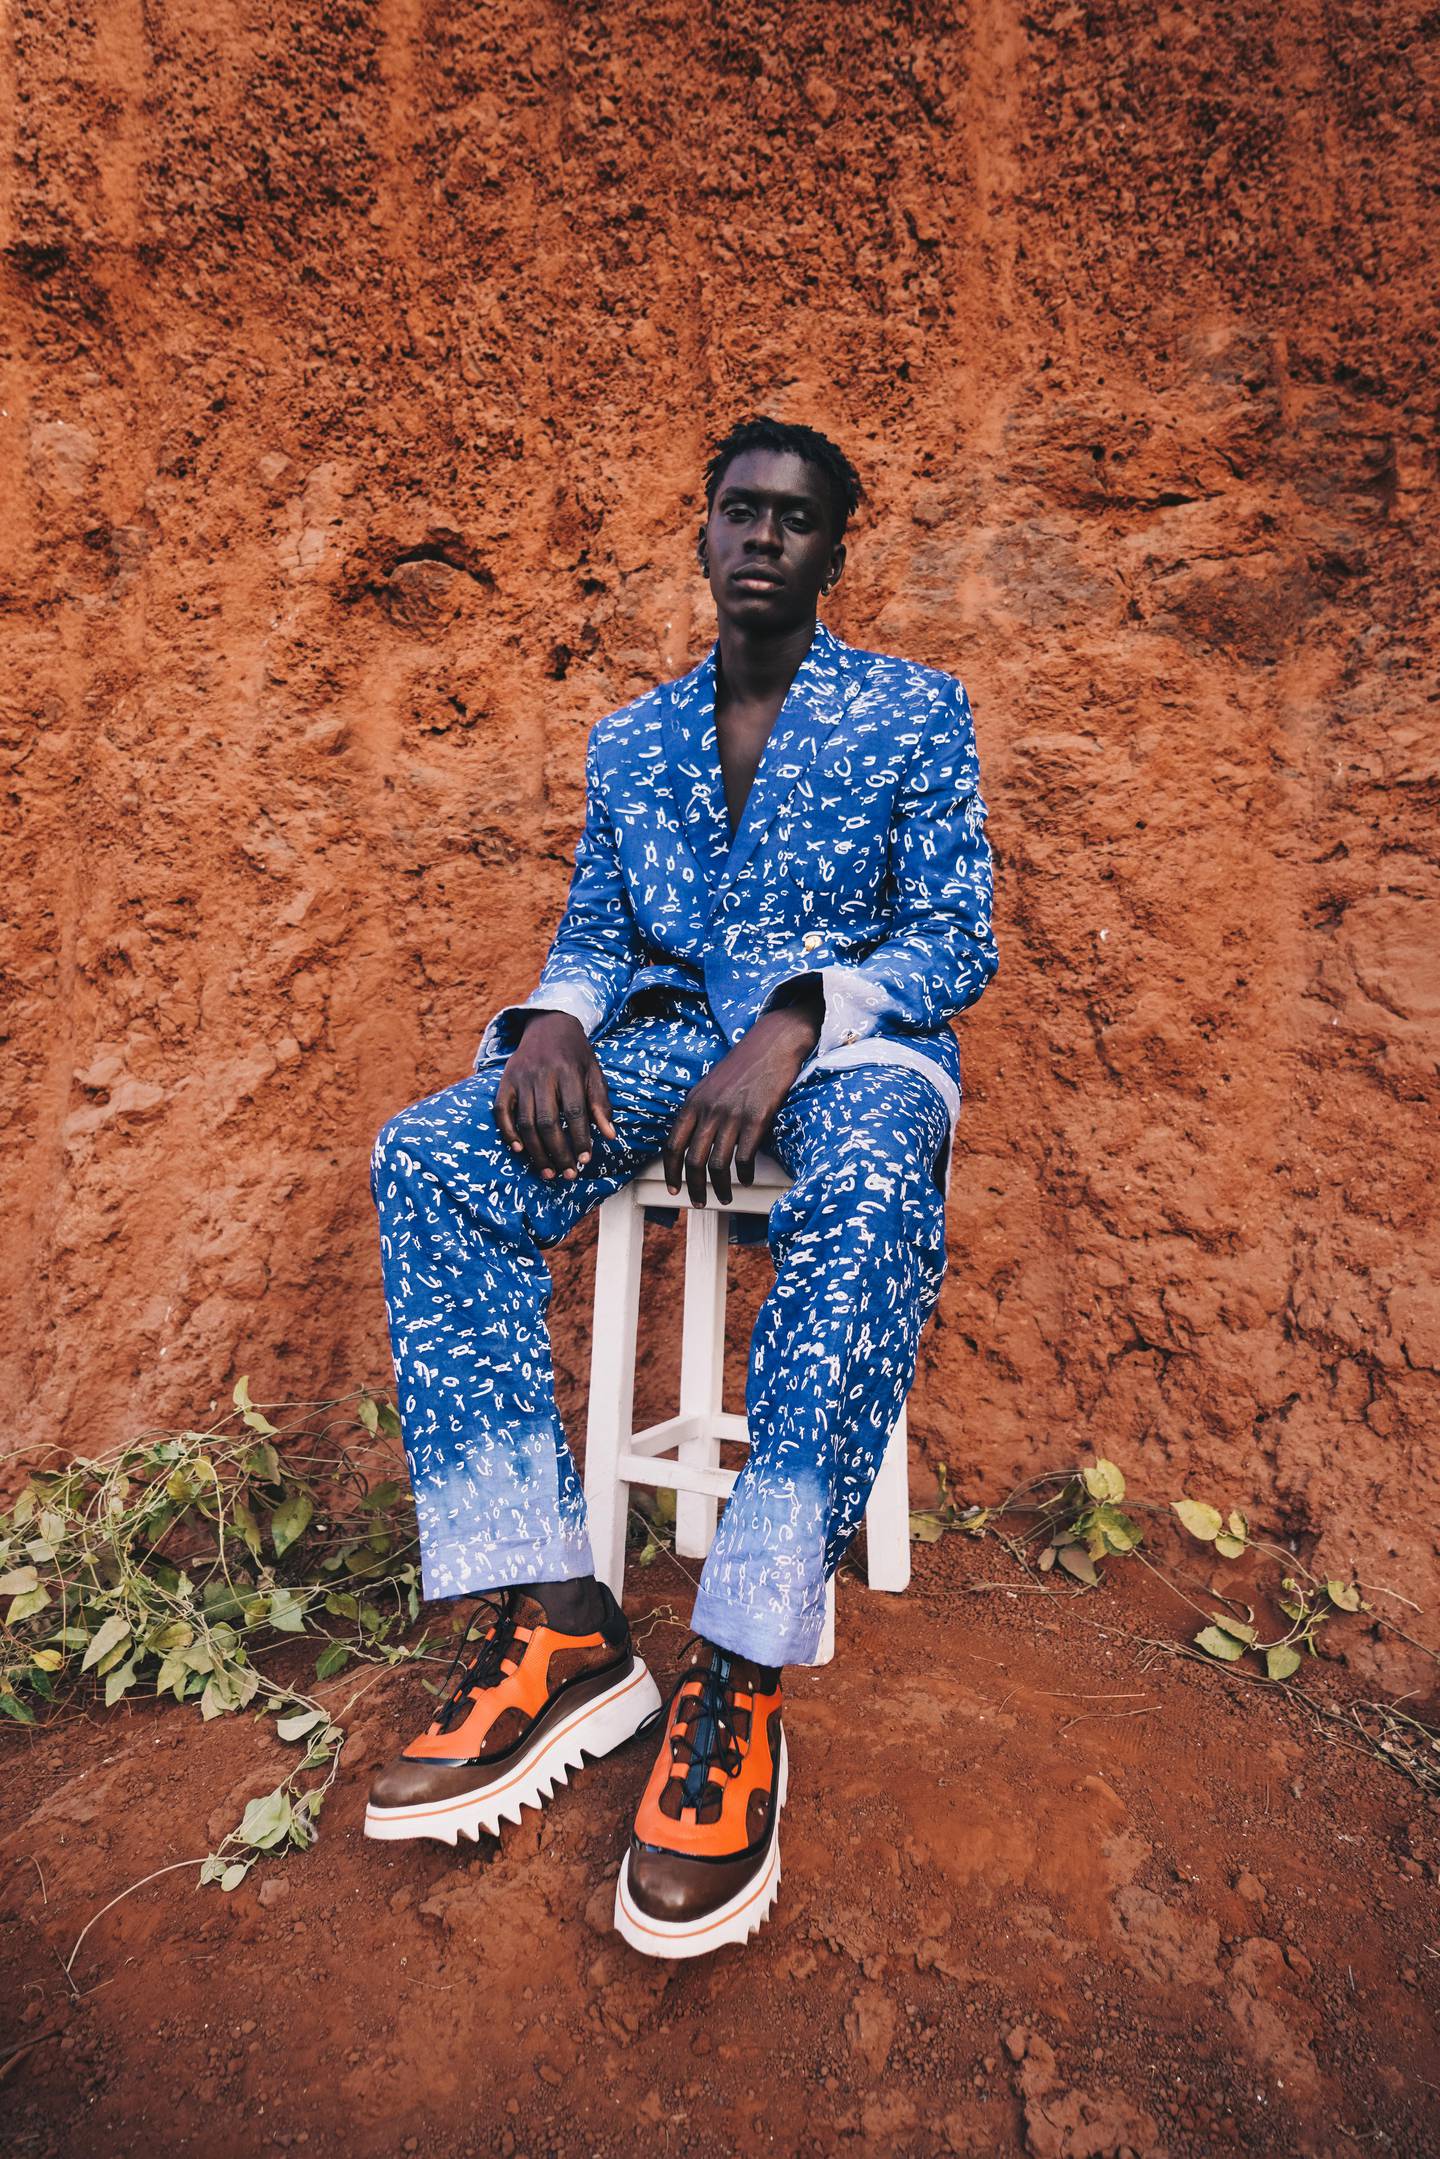 Milcos Badji's Senegalese sneaker start-up Nio Far has benefitted from a range of organic celebrity endorsements.